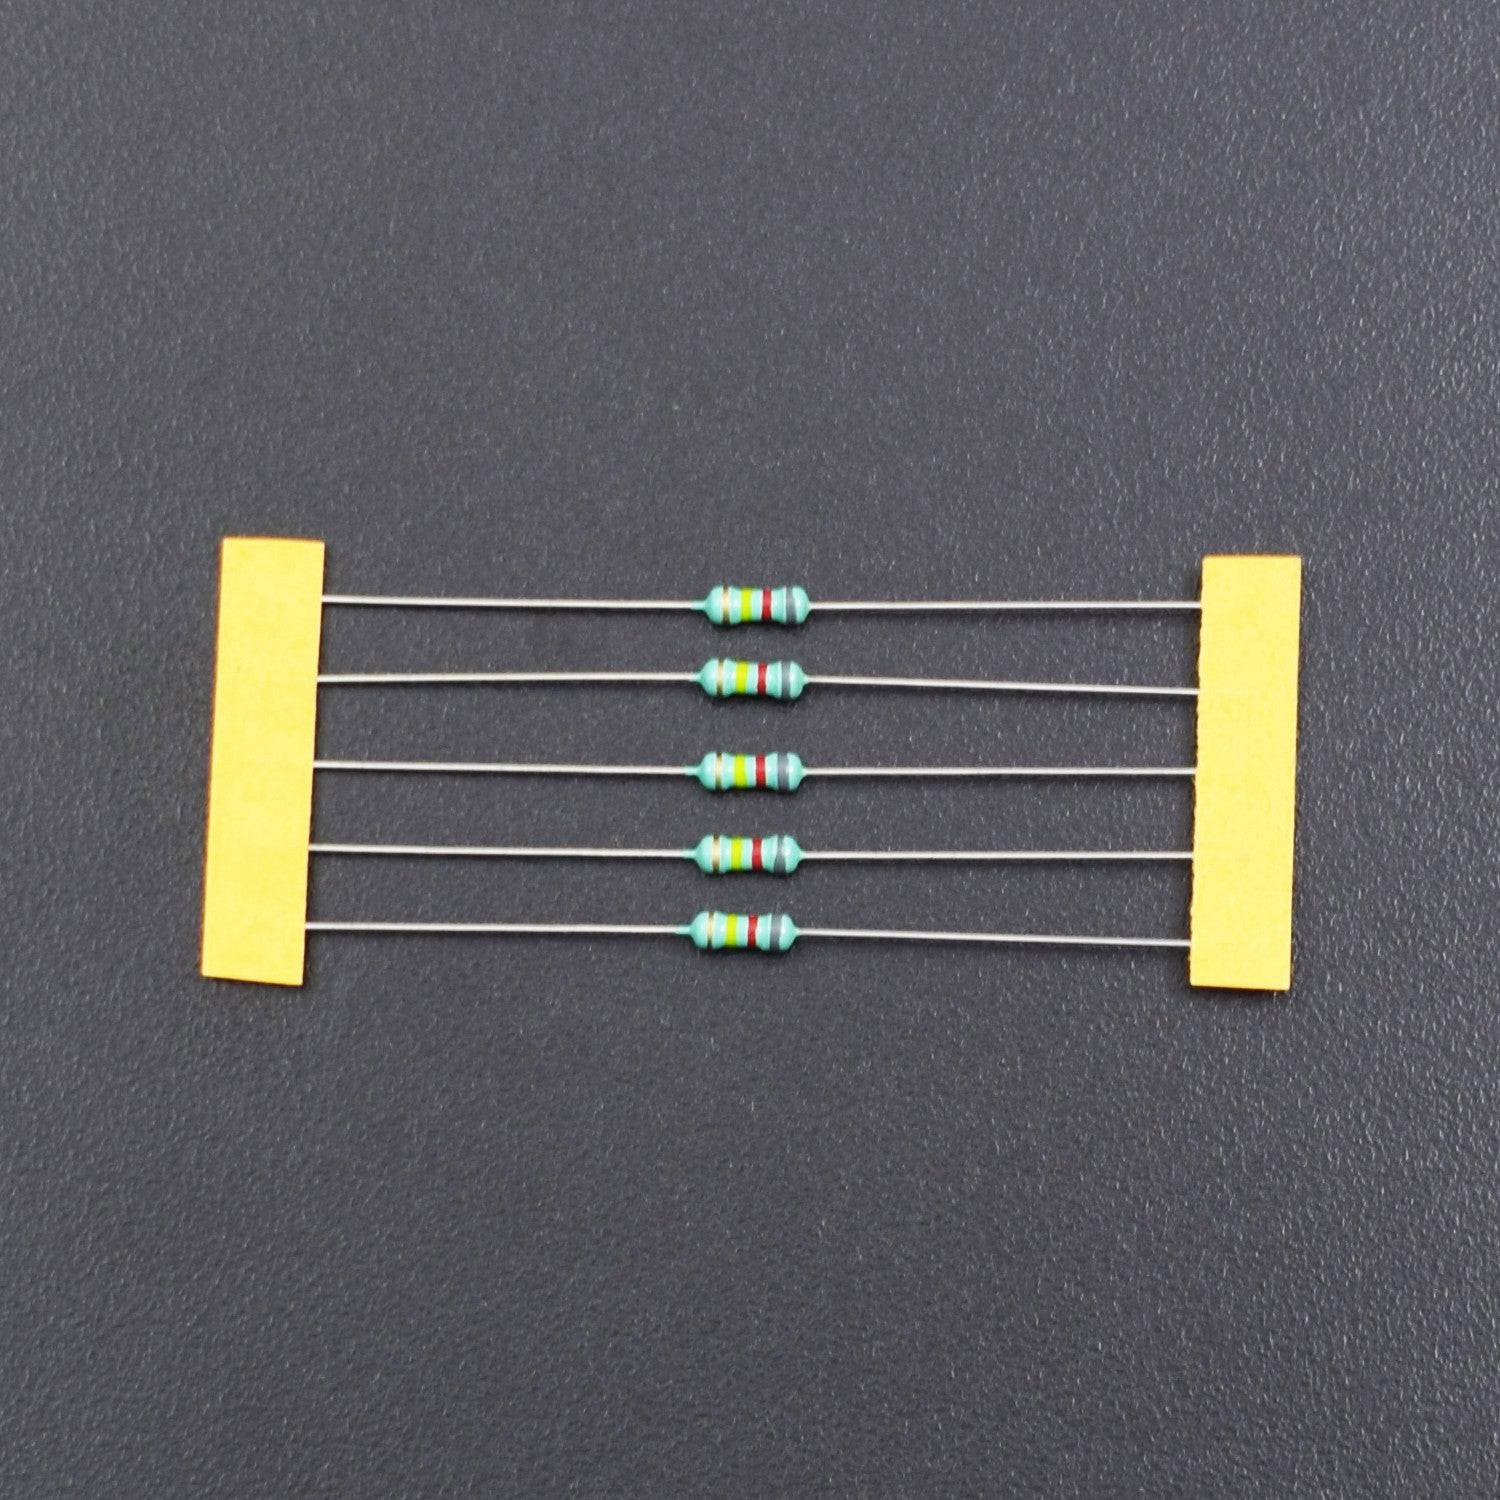 150 Ohm Resistance 1/4W Power Rating  5% Tolerance Carbon Film Resistor- RS623 - REES52